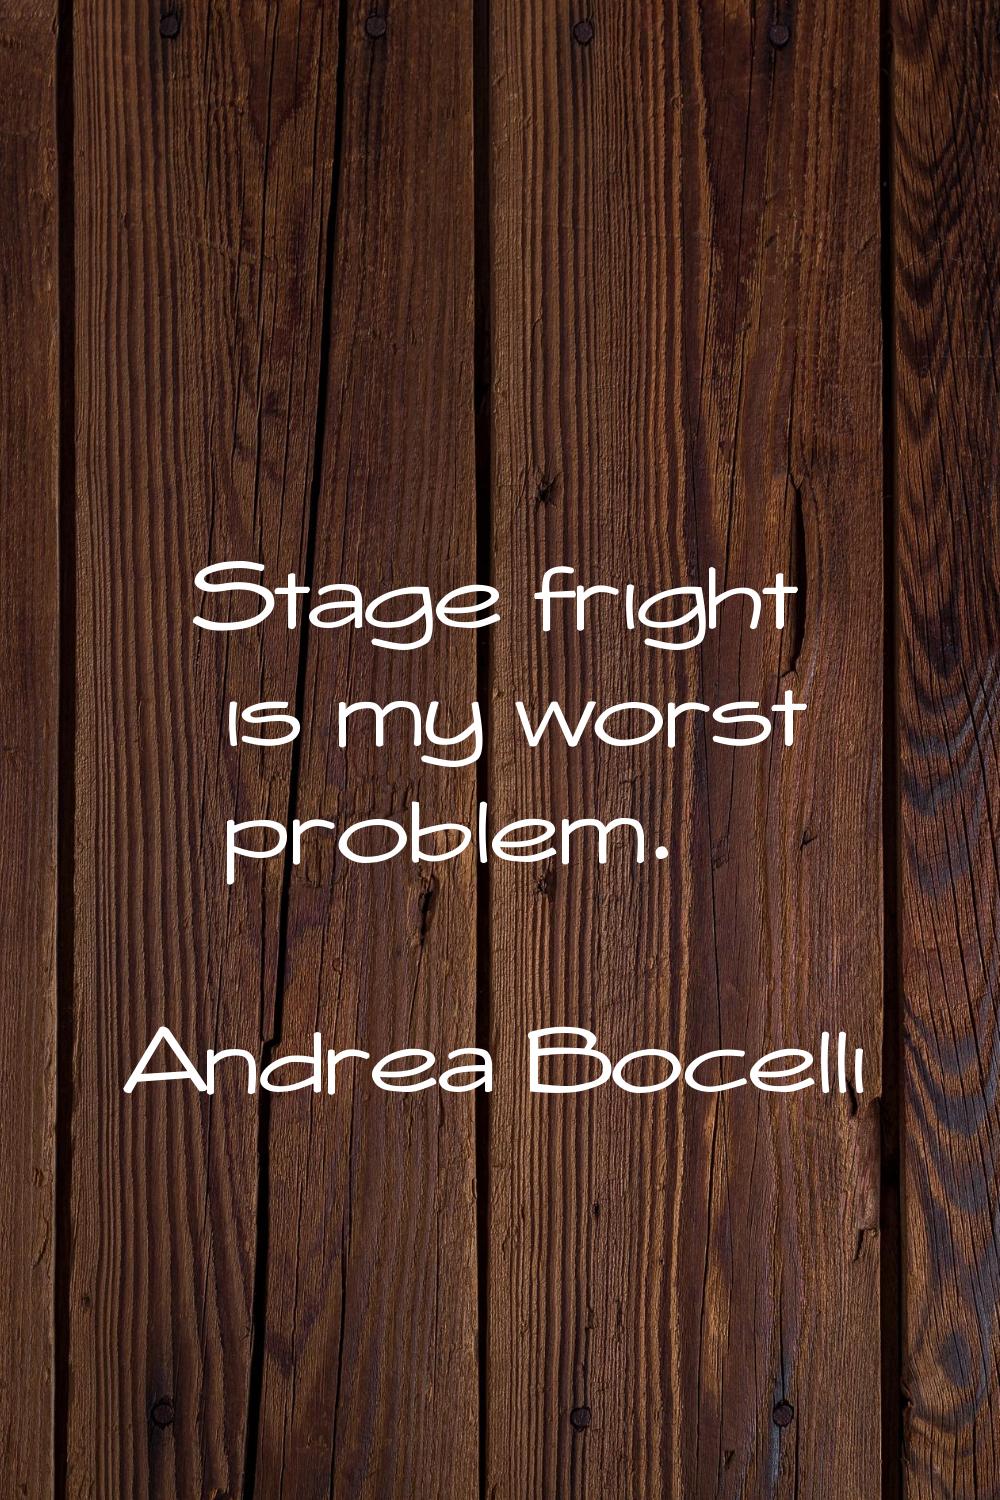 Stage fright is my worst problem.